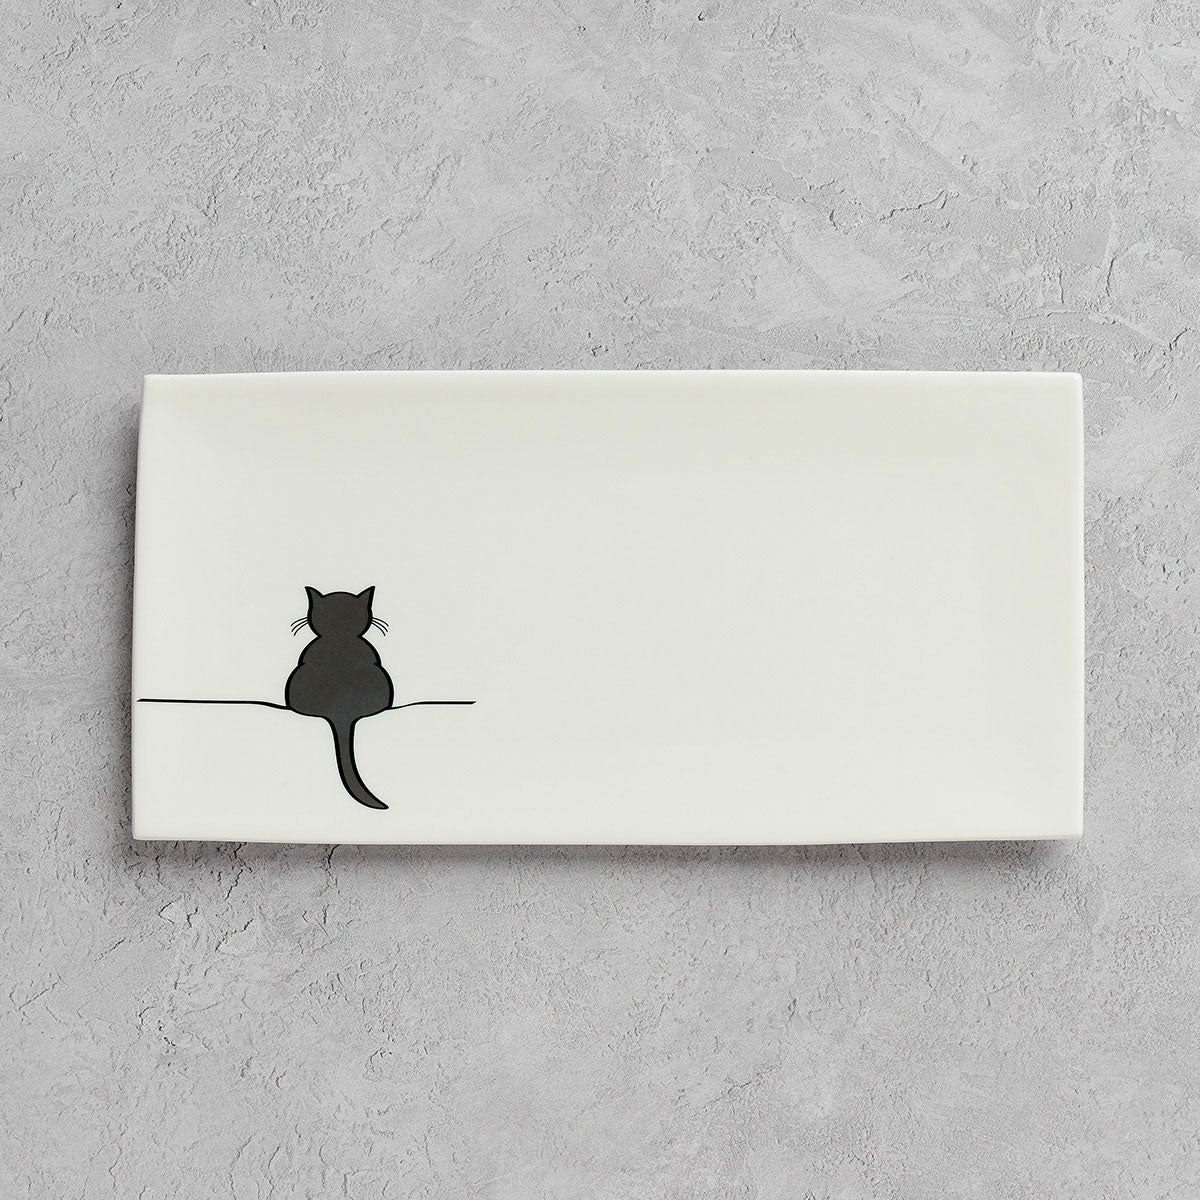 Crouching Cat Large Serving Tray